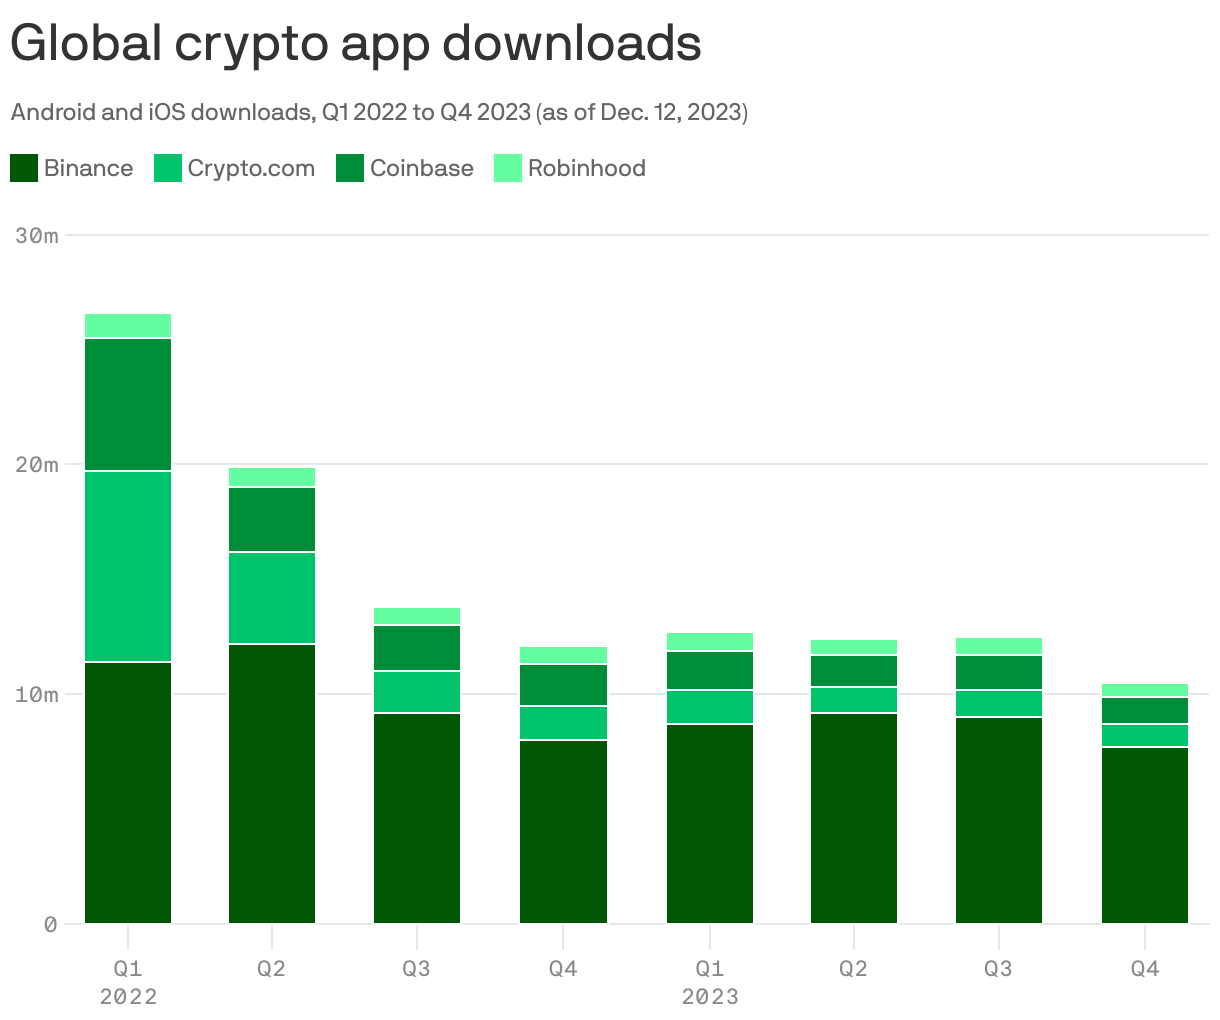 Global crypto app downloads